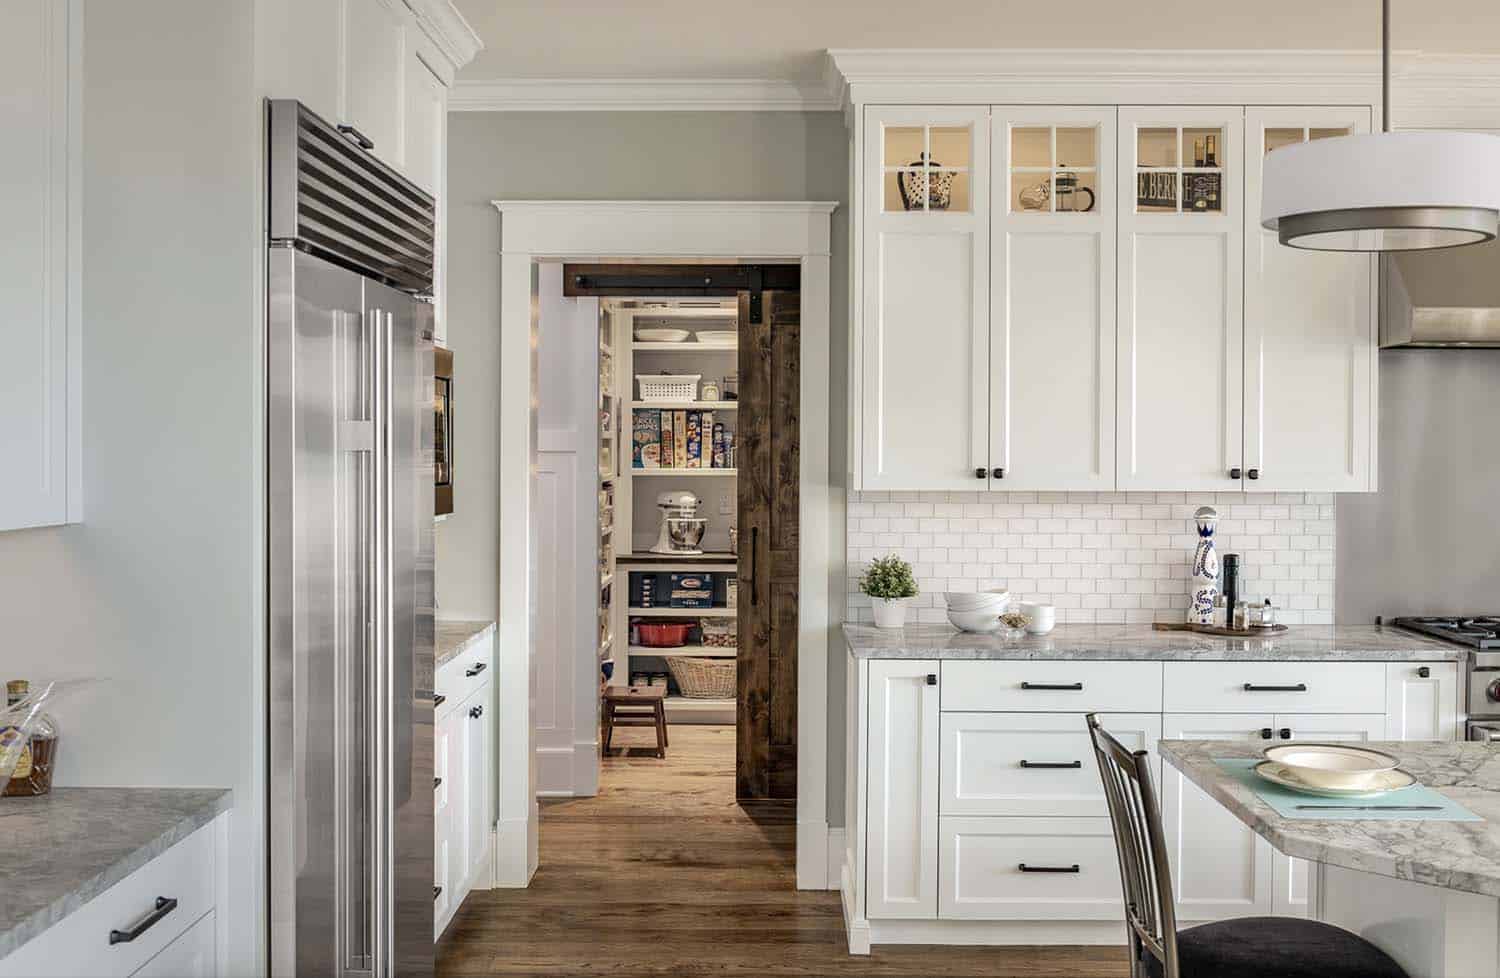 transitional-style-kitchen-looking-into-pantry